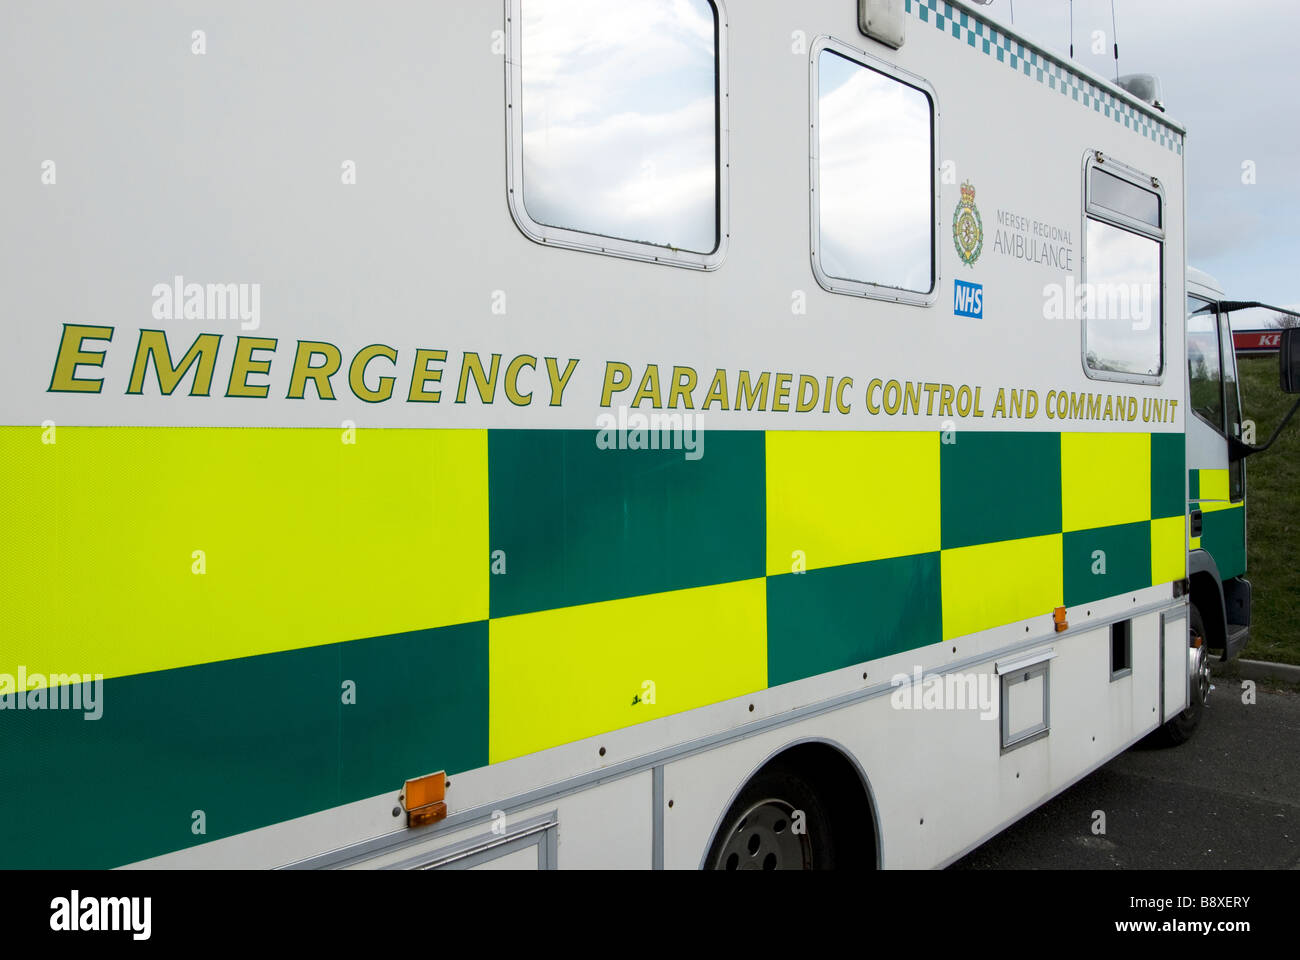 Emergency Paramedic Command and Control Unit Stock Photo